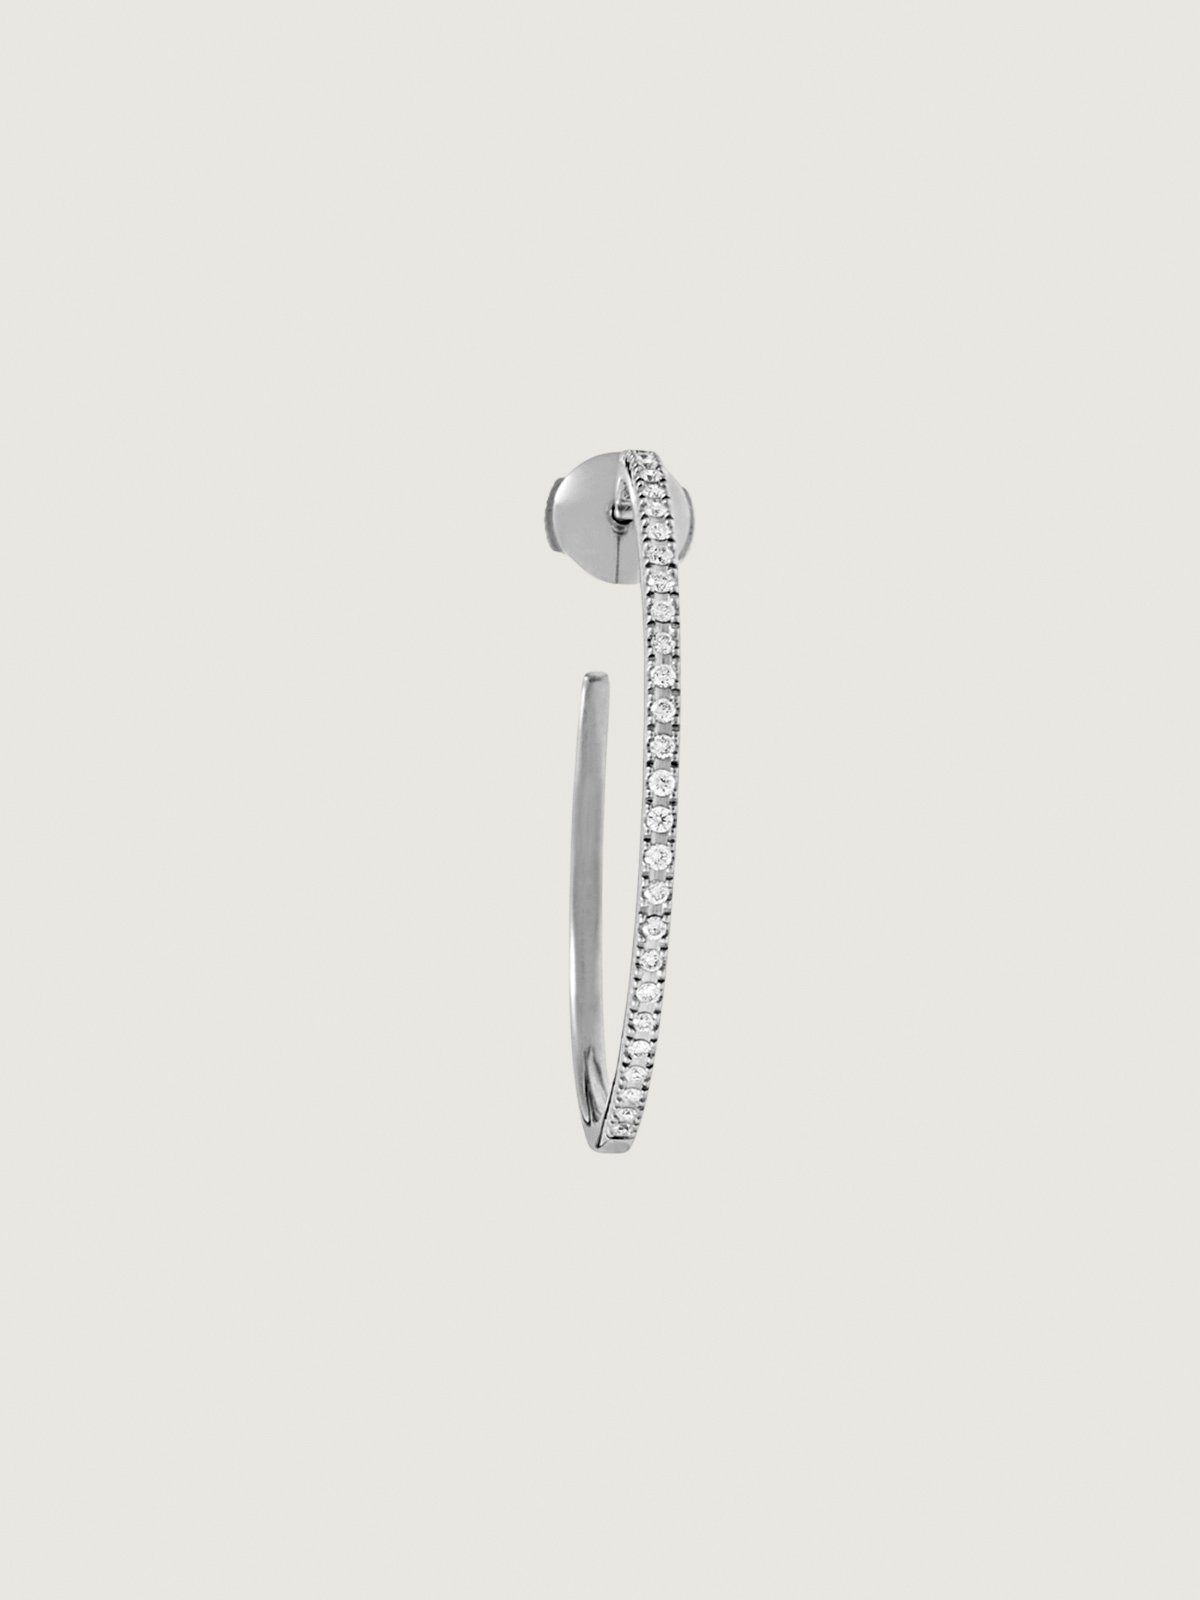 Single large hoop earring made of 18K white gold with diamonds